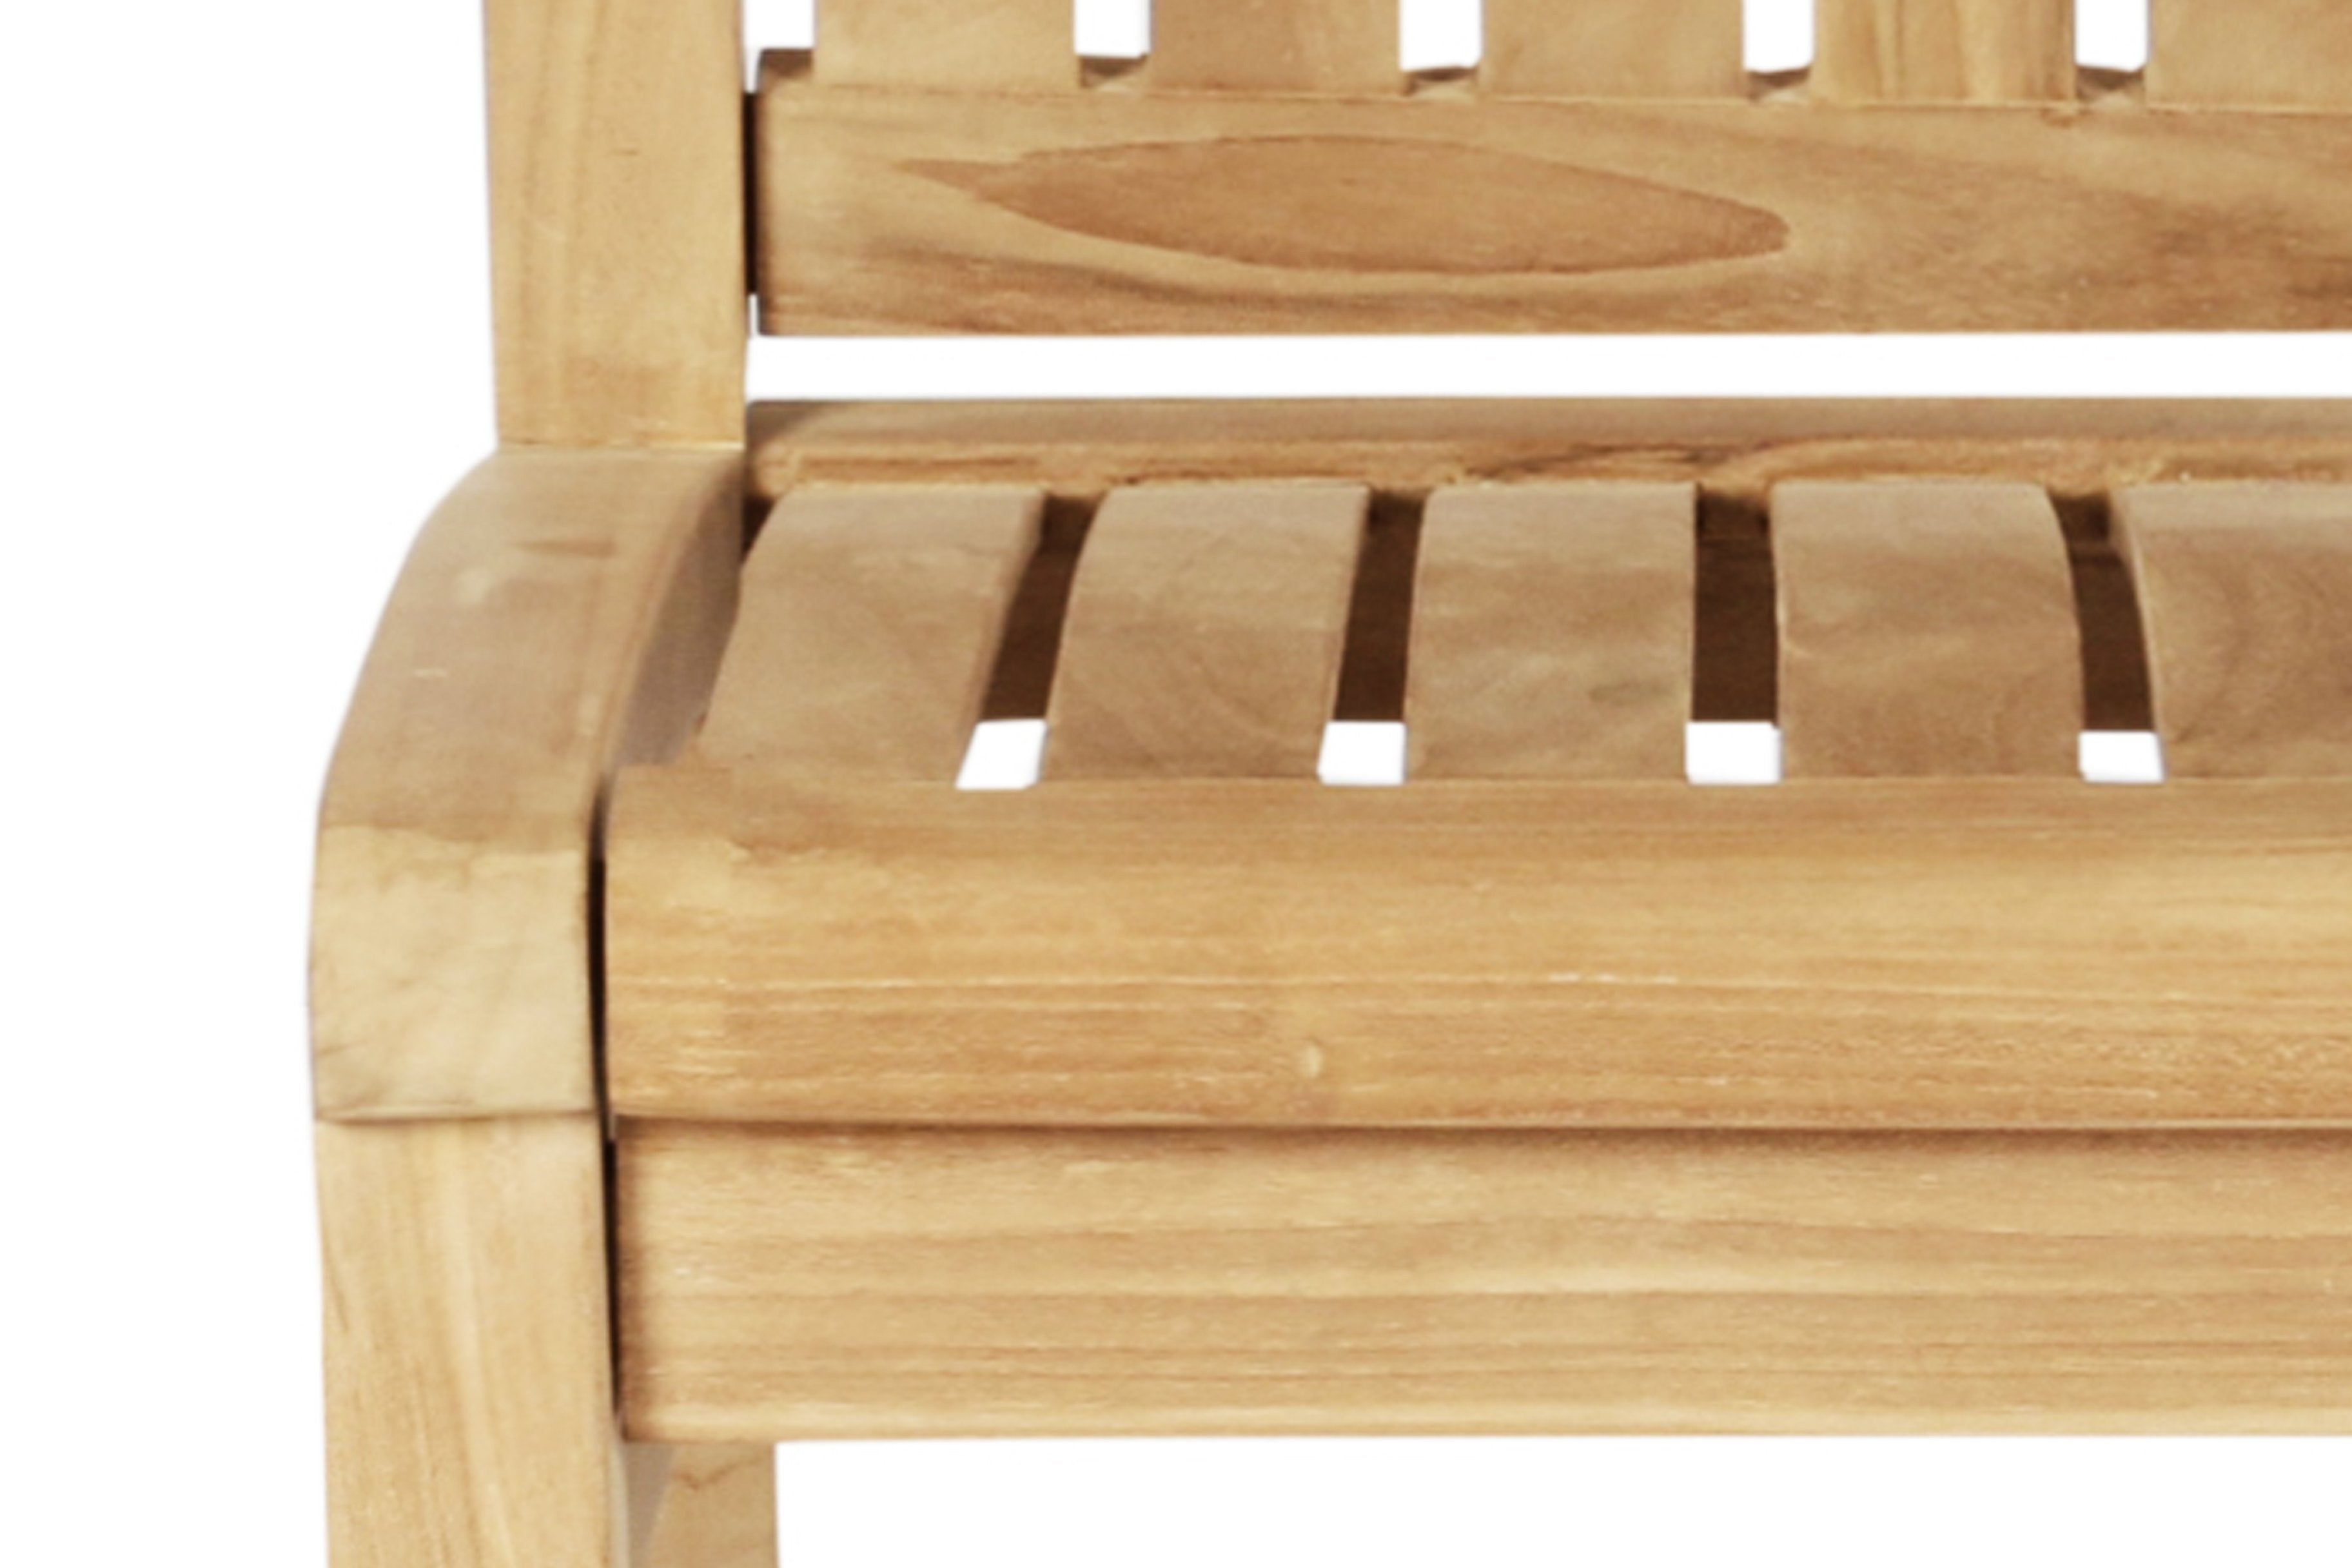 East India Kingston Chair - Tucker Barbecues